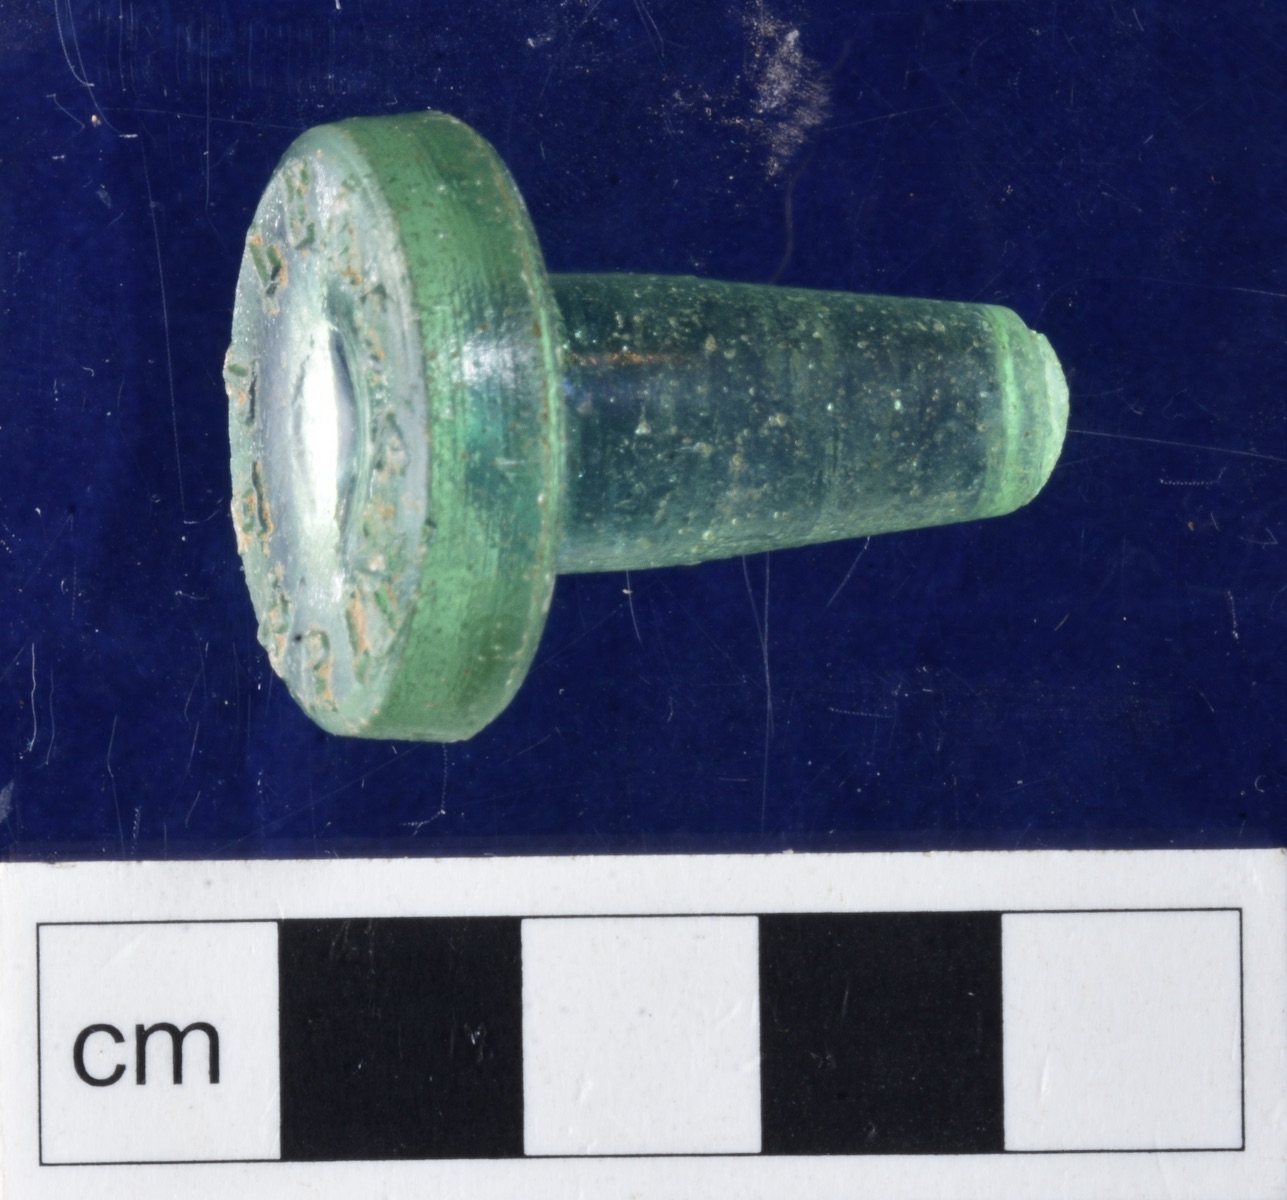 IMAGE 2 – side view of lea & perrins’ glass bottle stopper that was located on the surface curtis park, armidale, nsw, march 2020 (m. zarb).